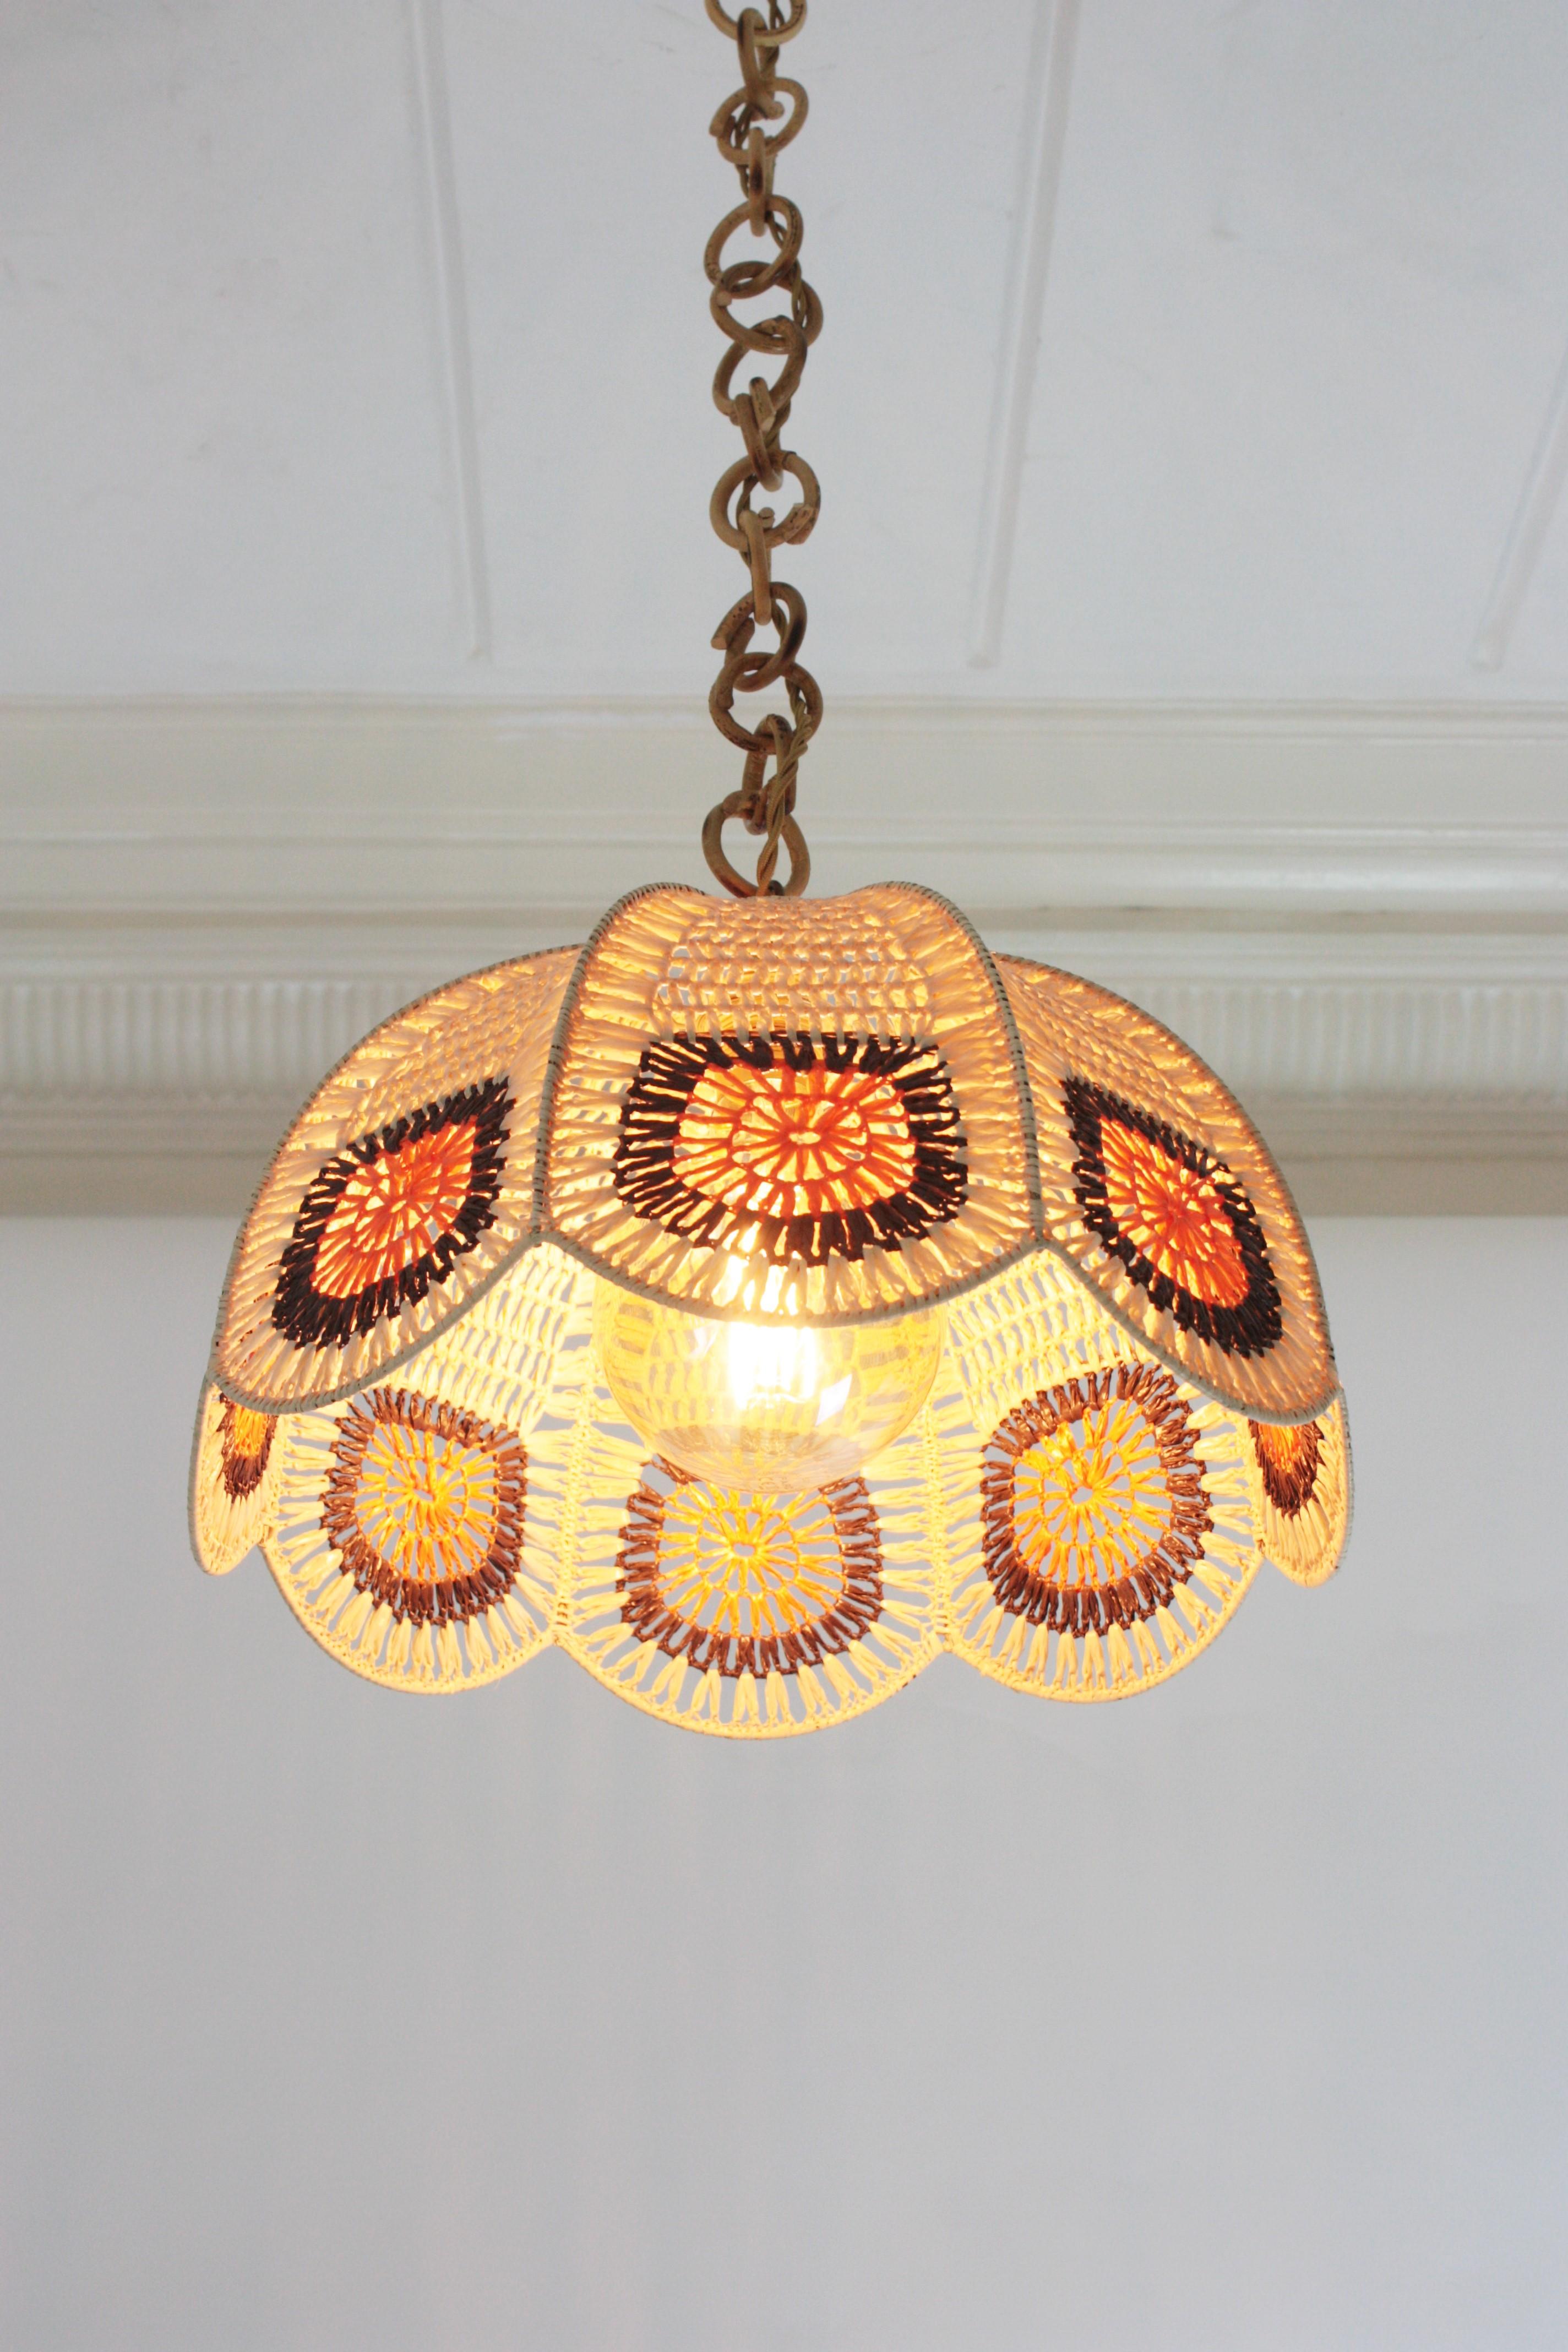 Spanish Modernist Pendant Lamp in Beige, Orange and Brown Macrame For Sale 7